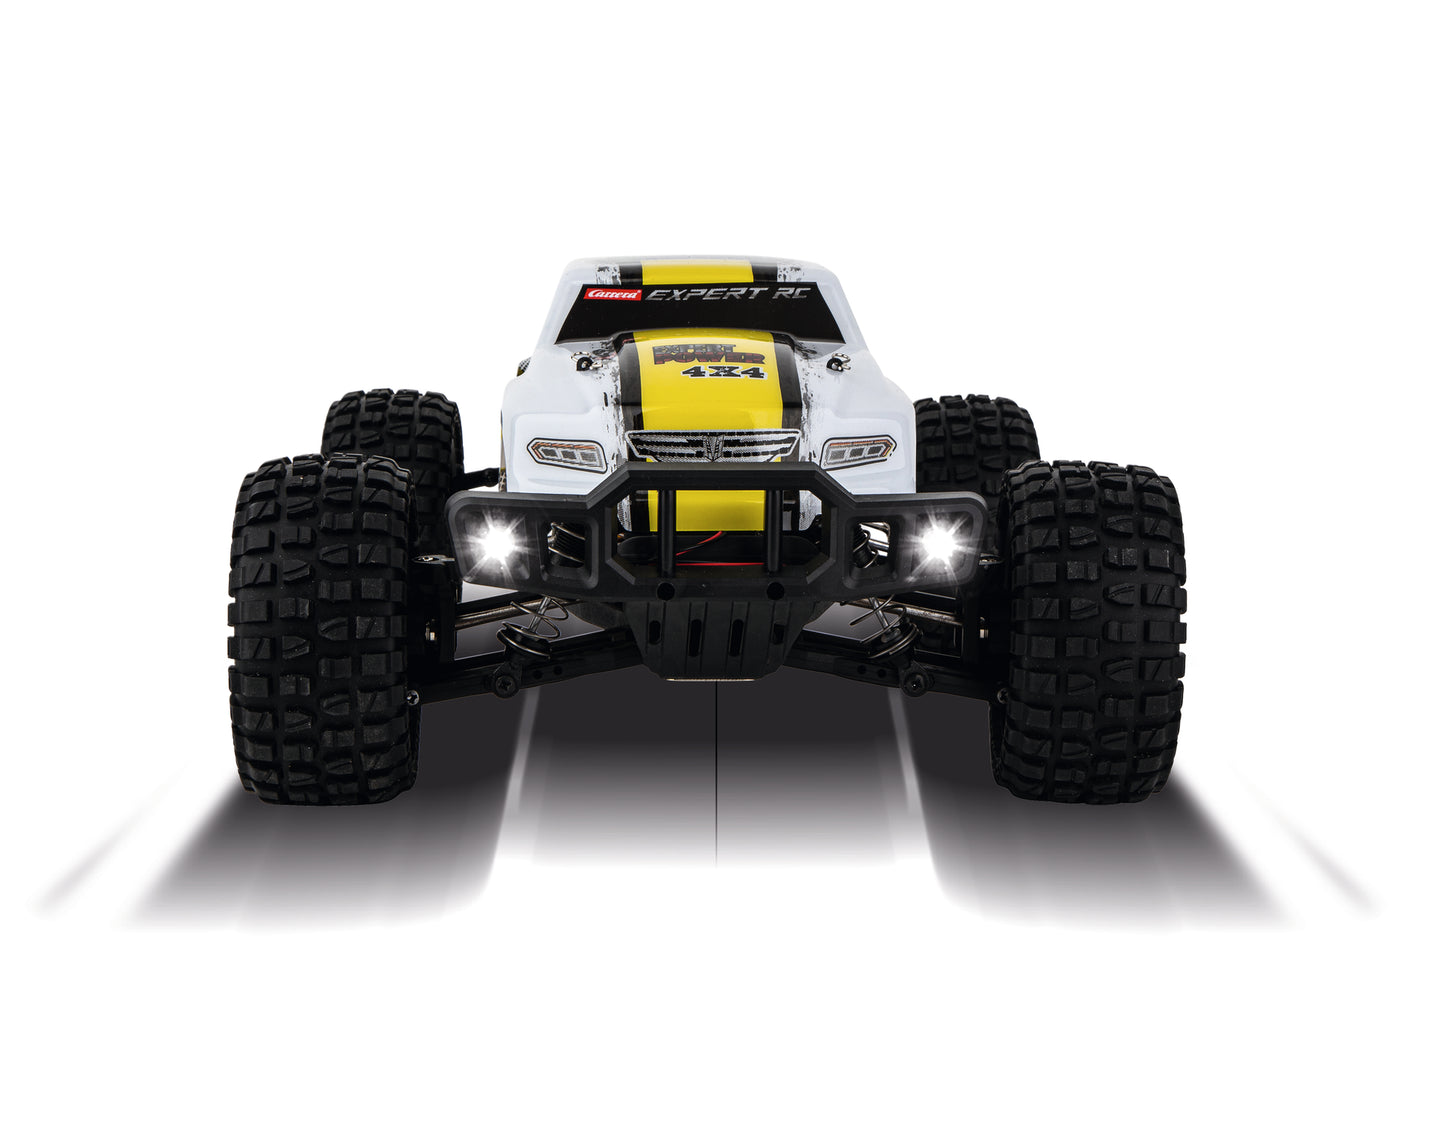 Carrera Expert RC - 2,4GHz Offroad Pickup